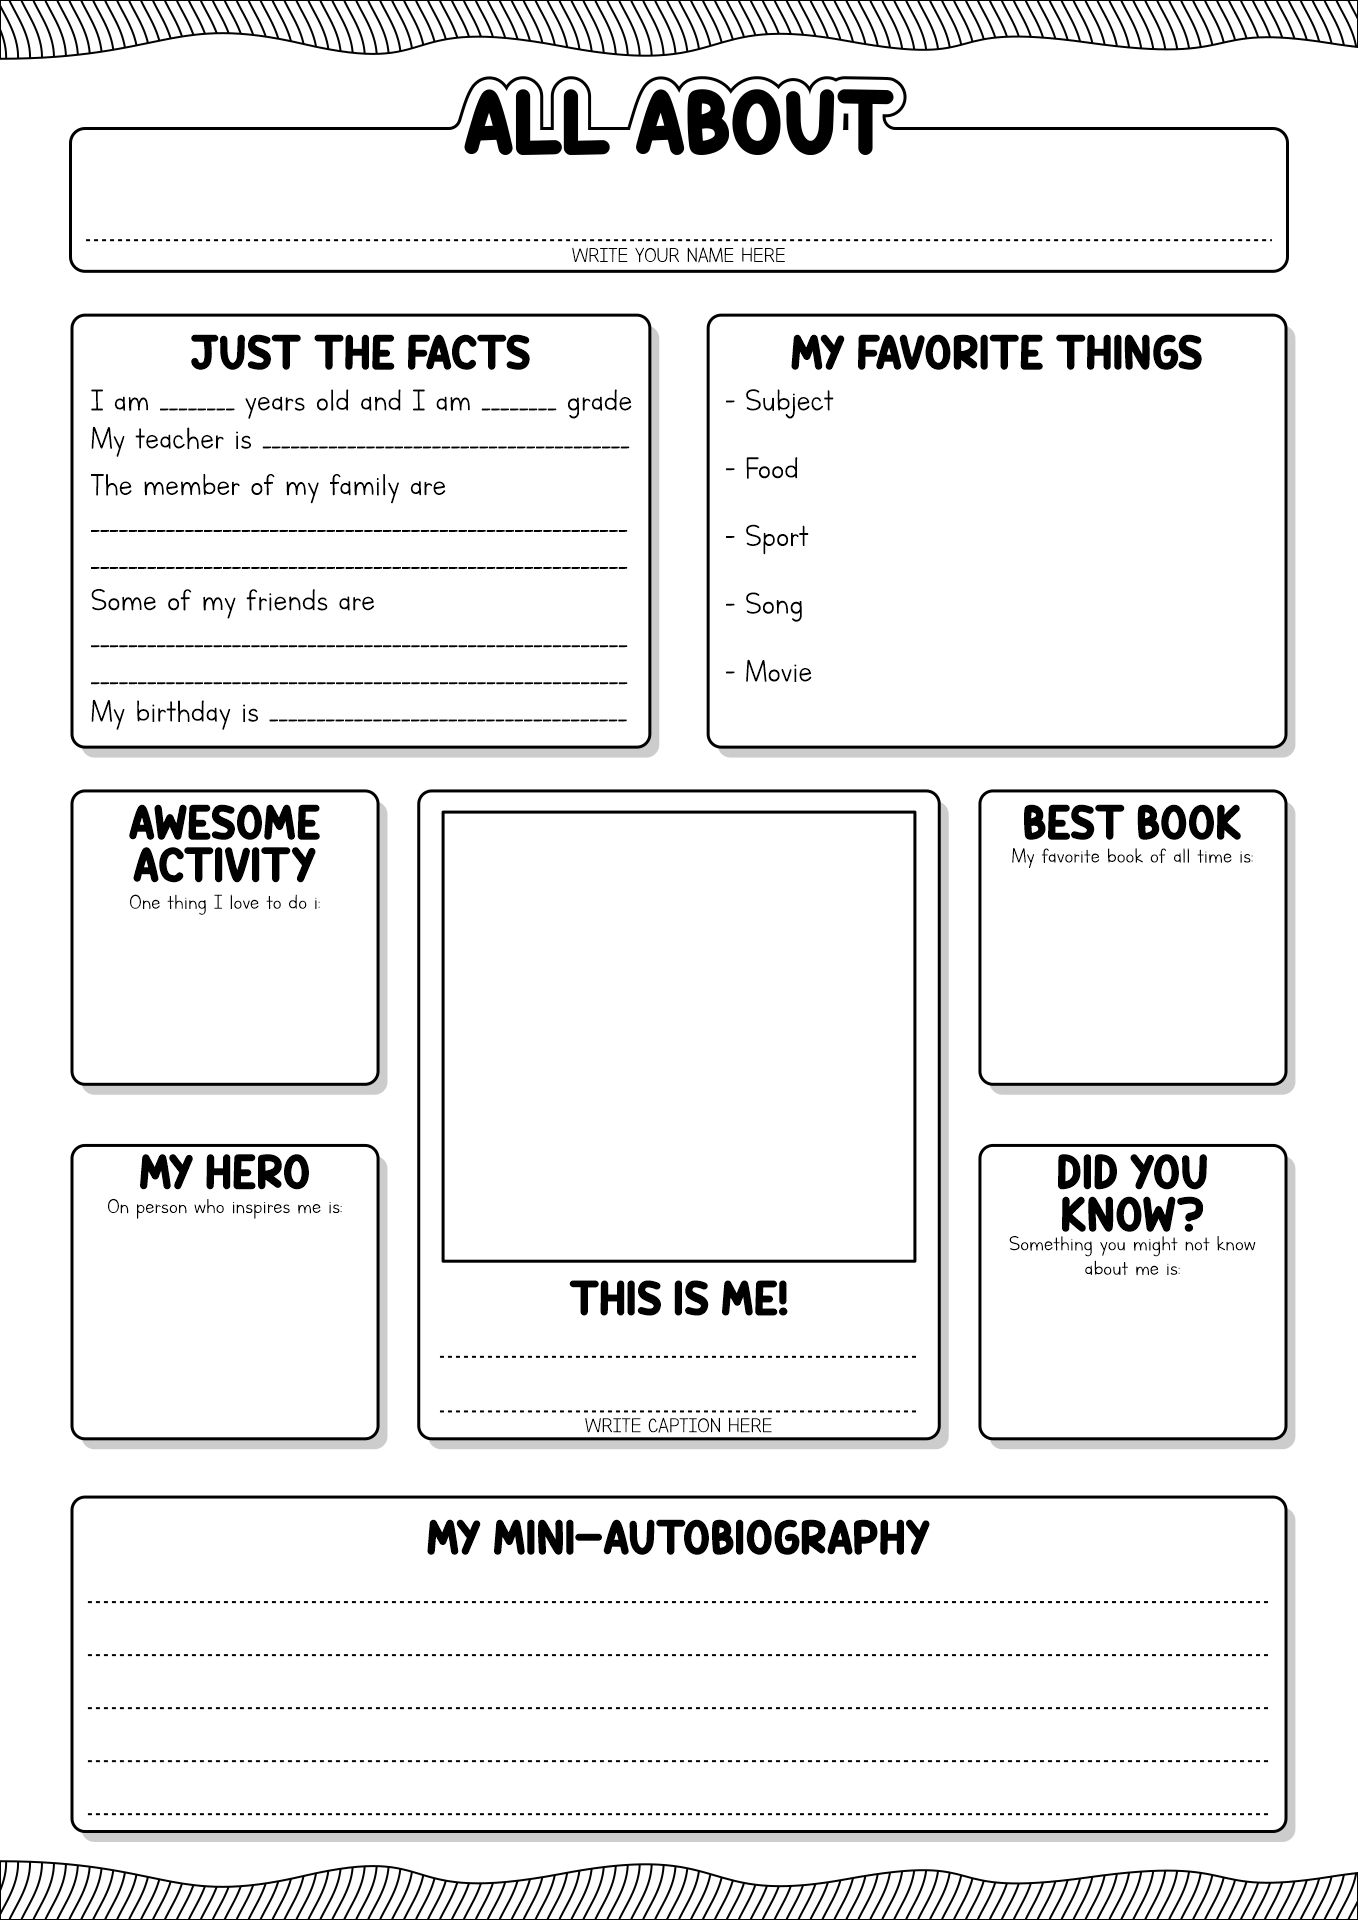 getting-to-know-me-worksheet